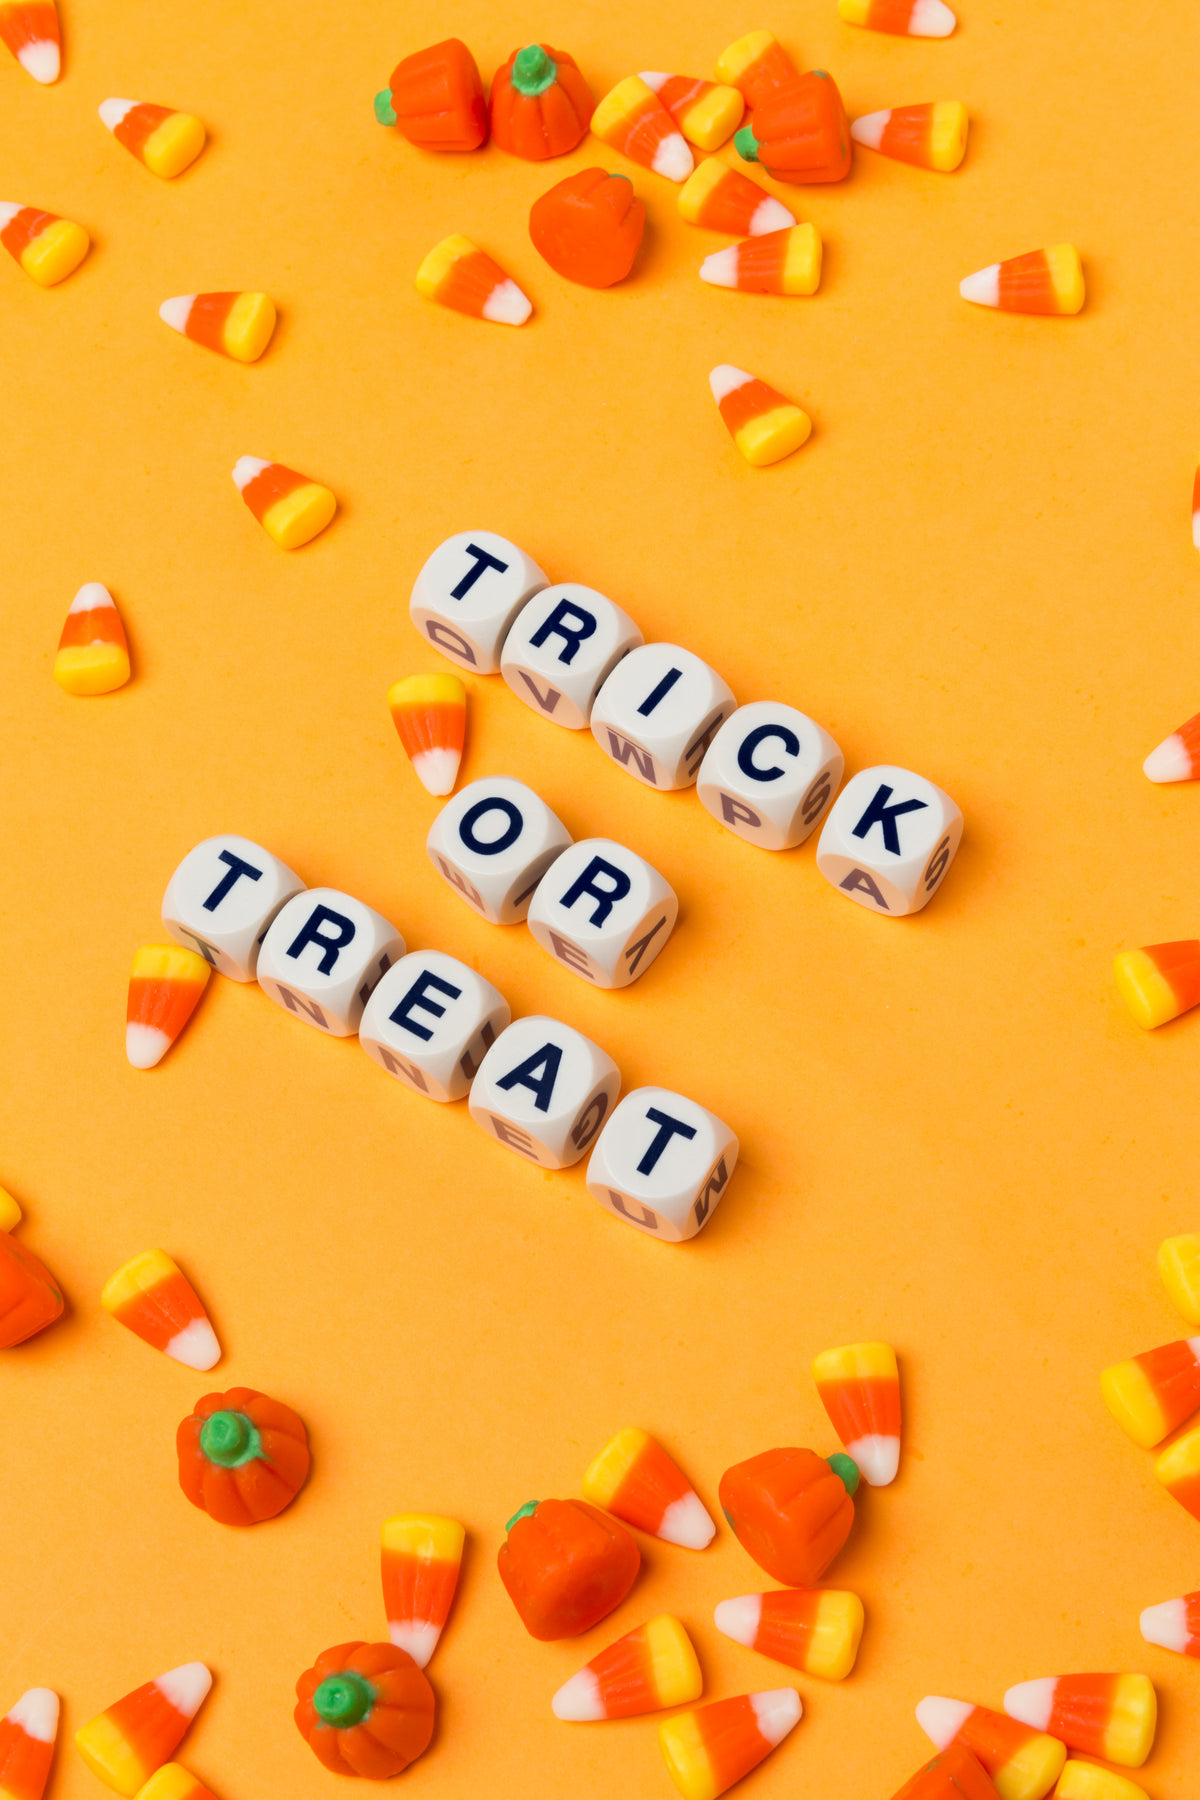 trick or treat on an orange background with candy corn